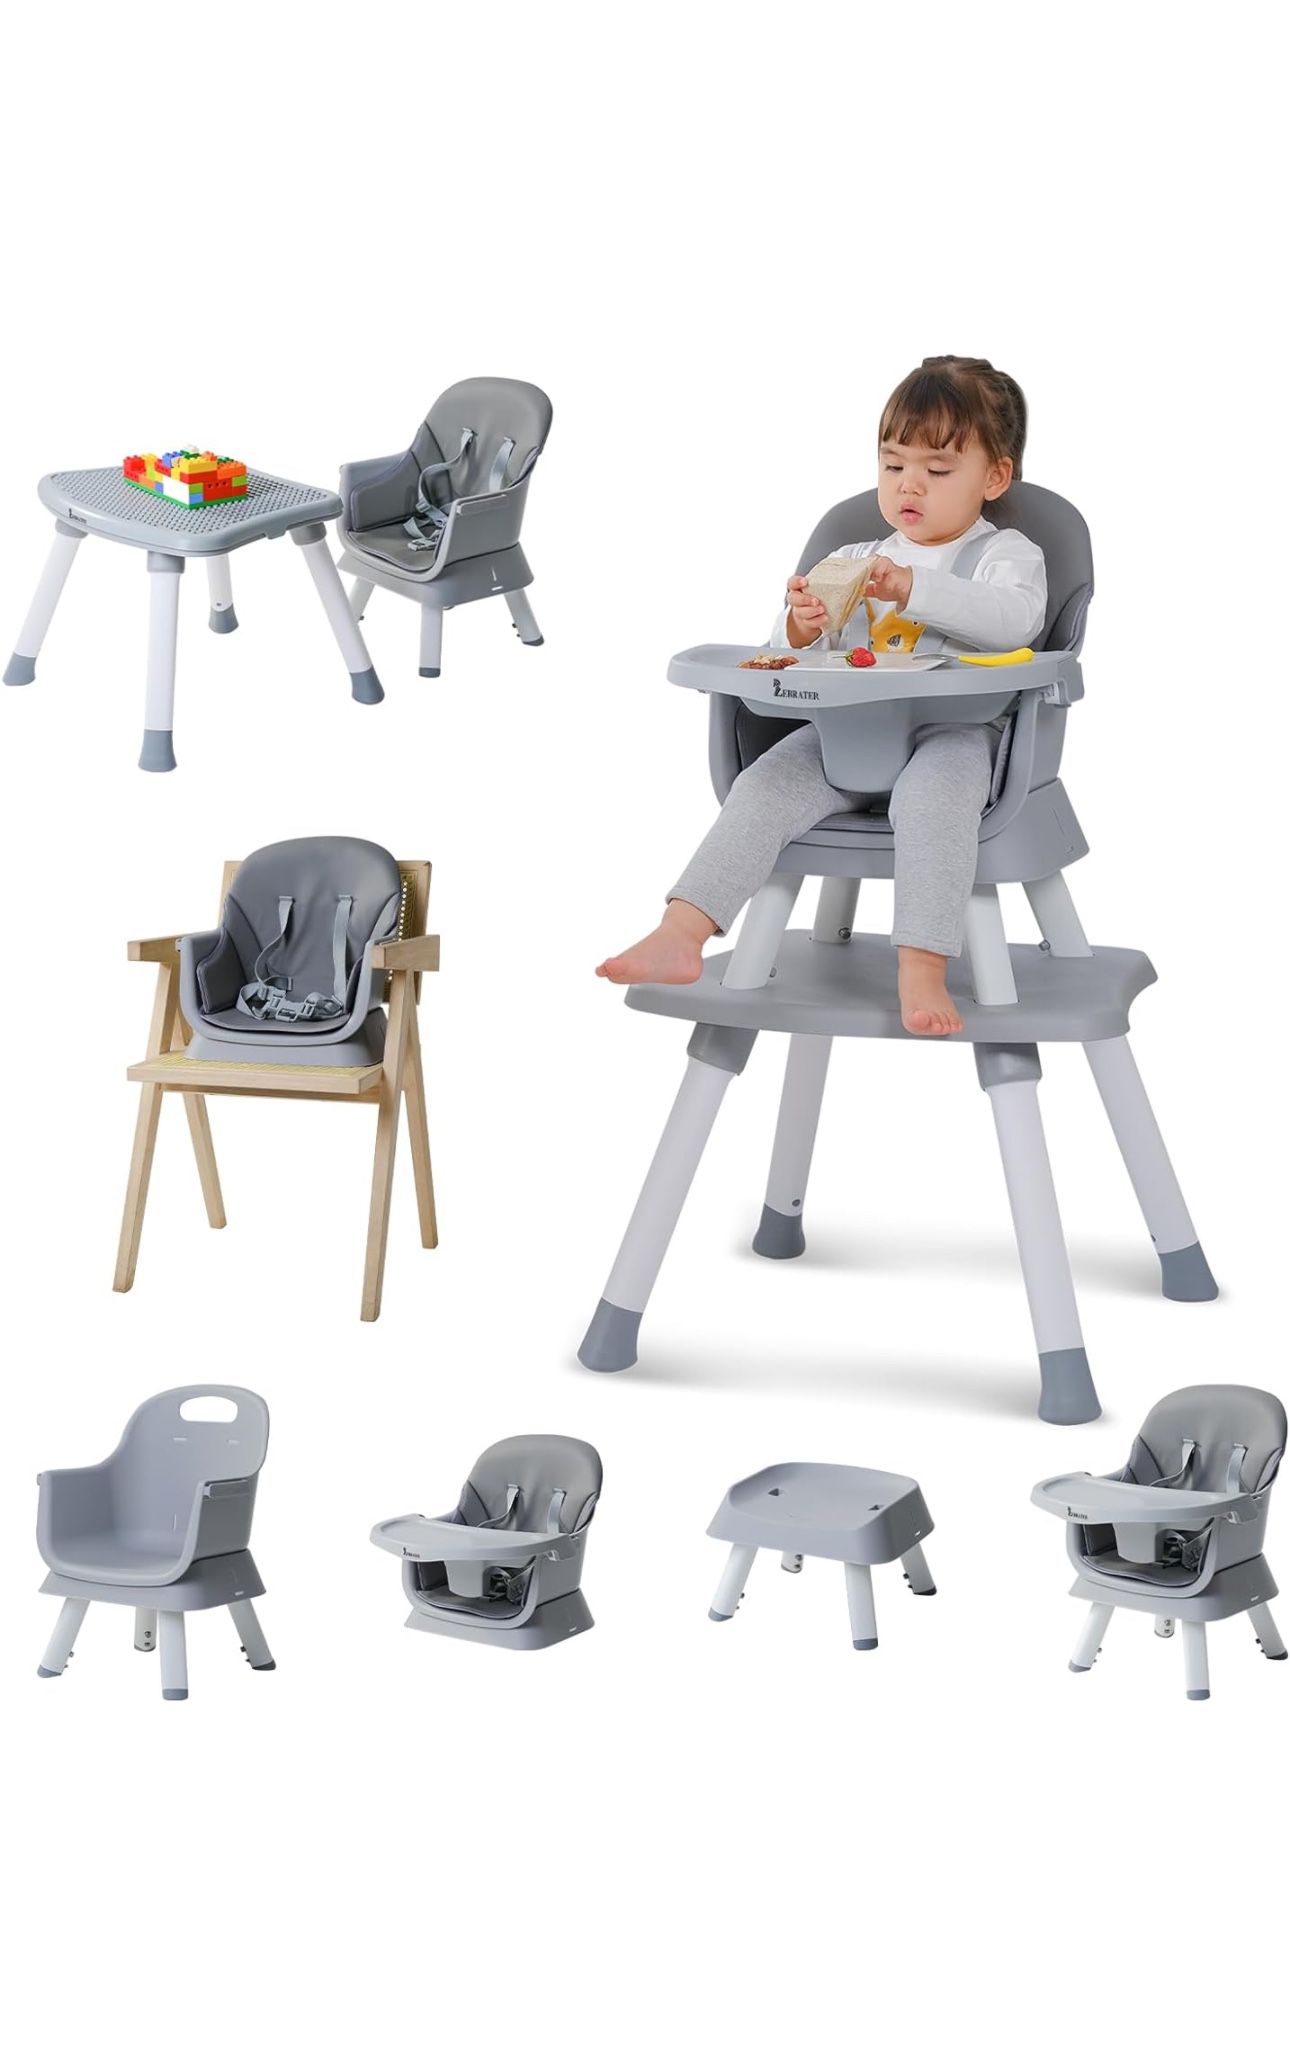 8 in 1 Highchairs for Babies and Toddlers,Nookbeya Baby High Chair Convertible High Chair for Baby,Kids Learning Table,Building Block Table,Kids Stool